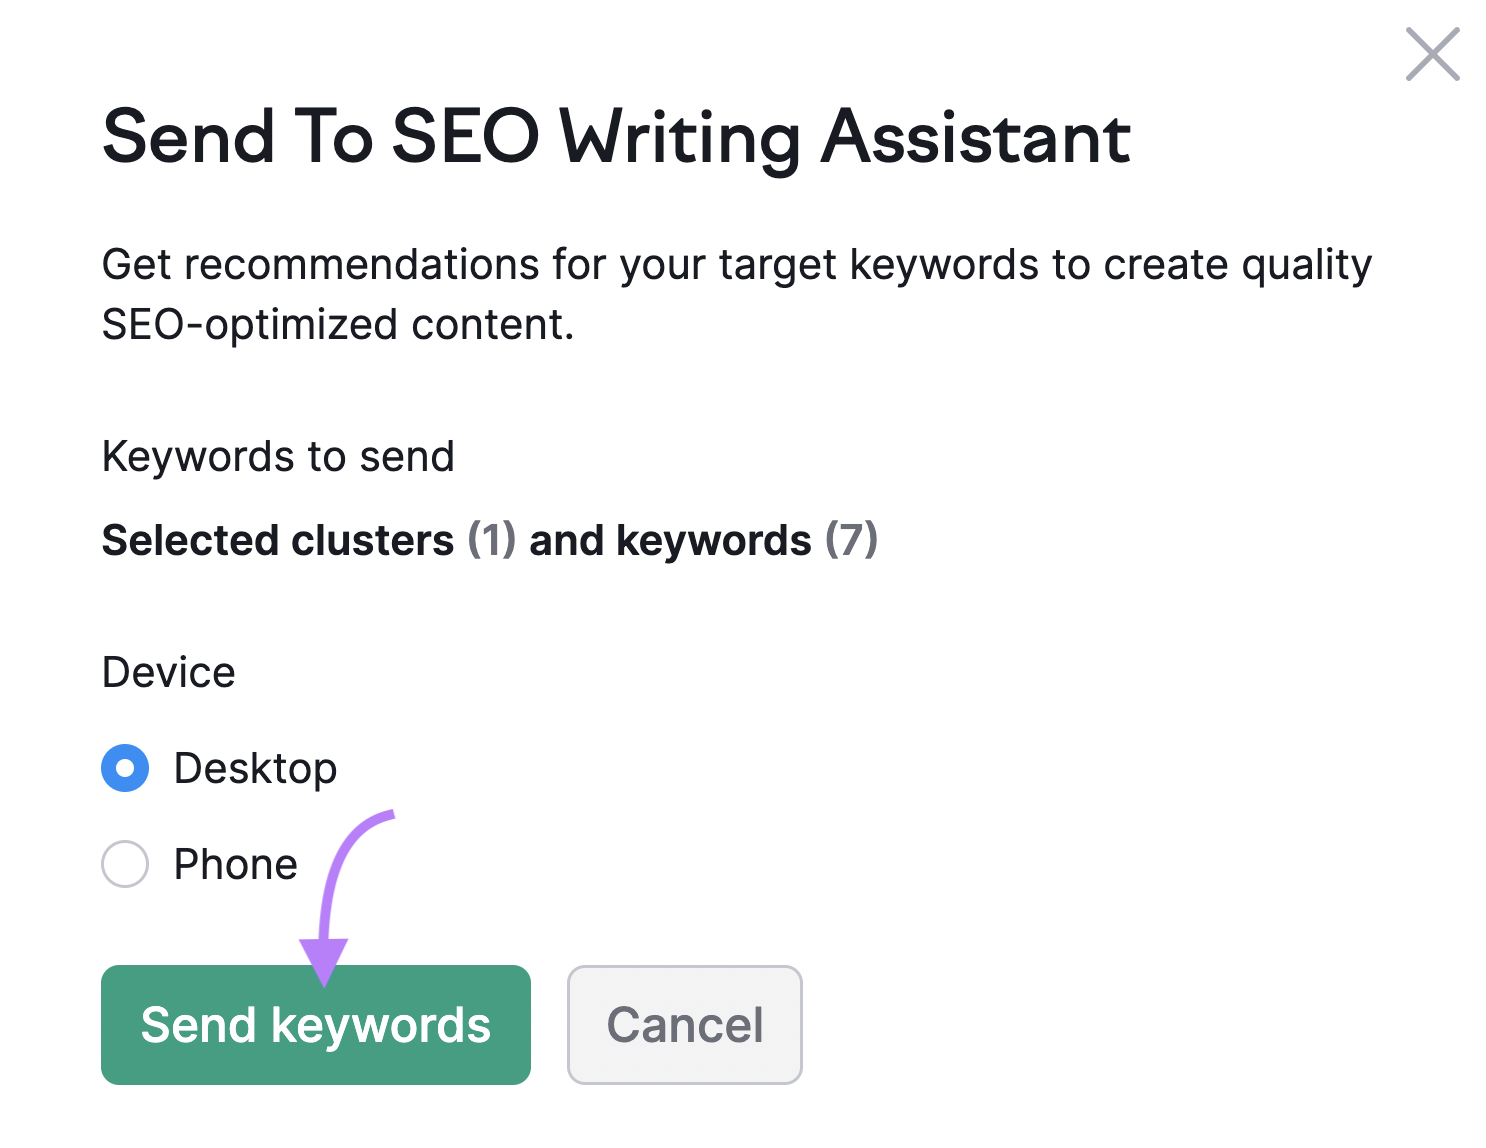 “Send keywords" button selected under “Send To SEO Writing Assistant" window